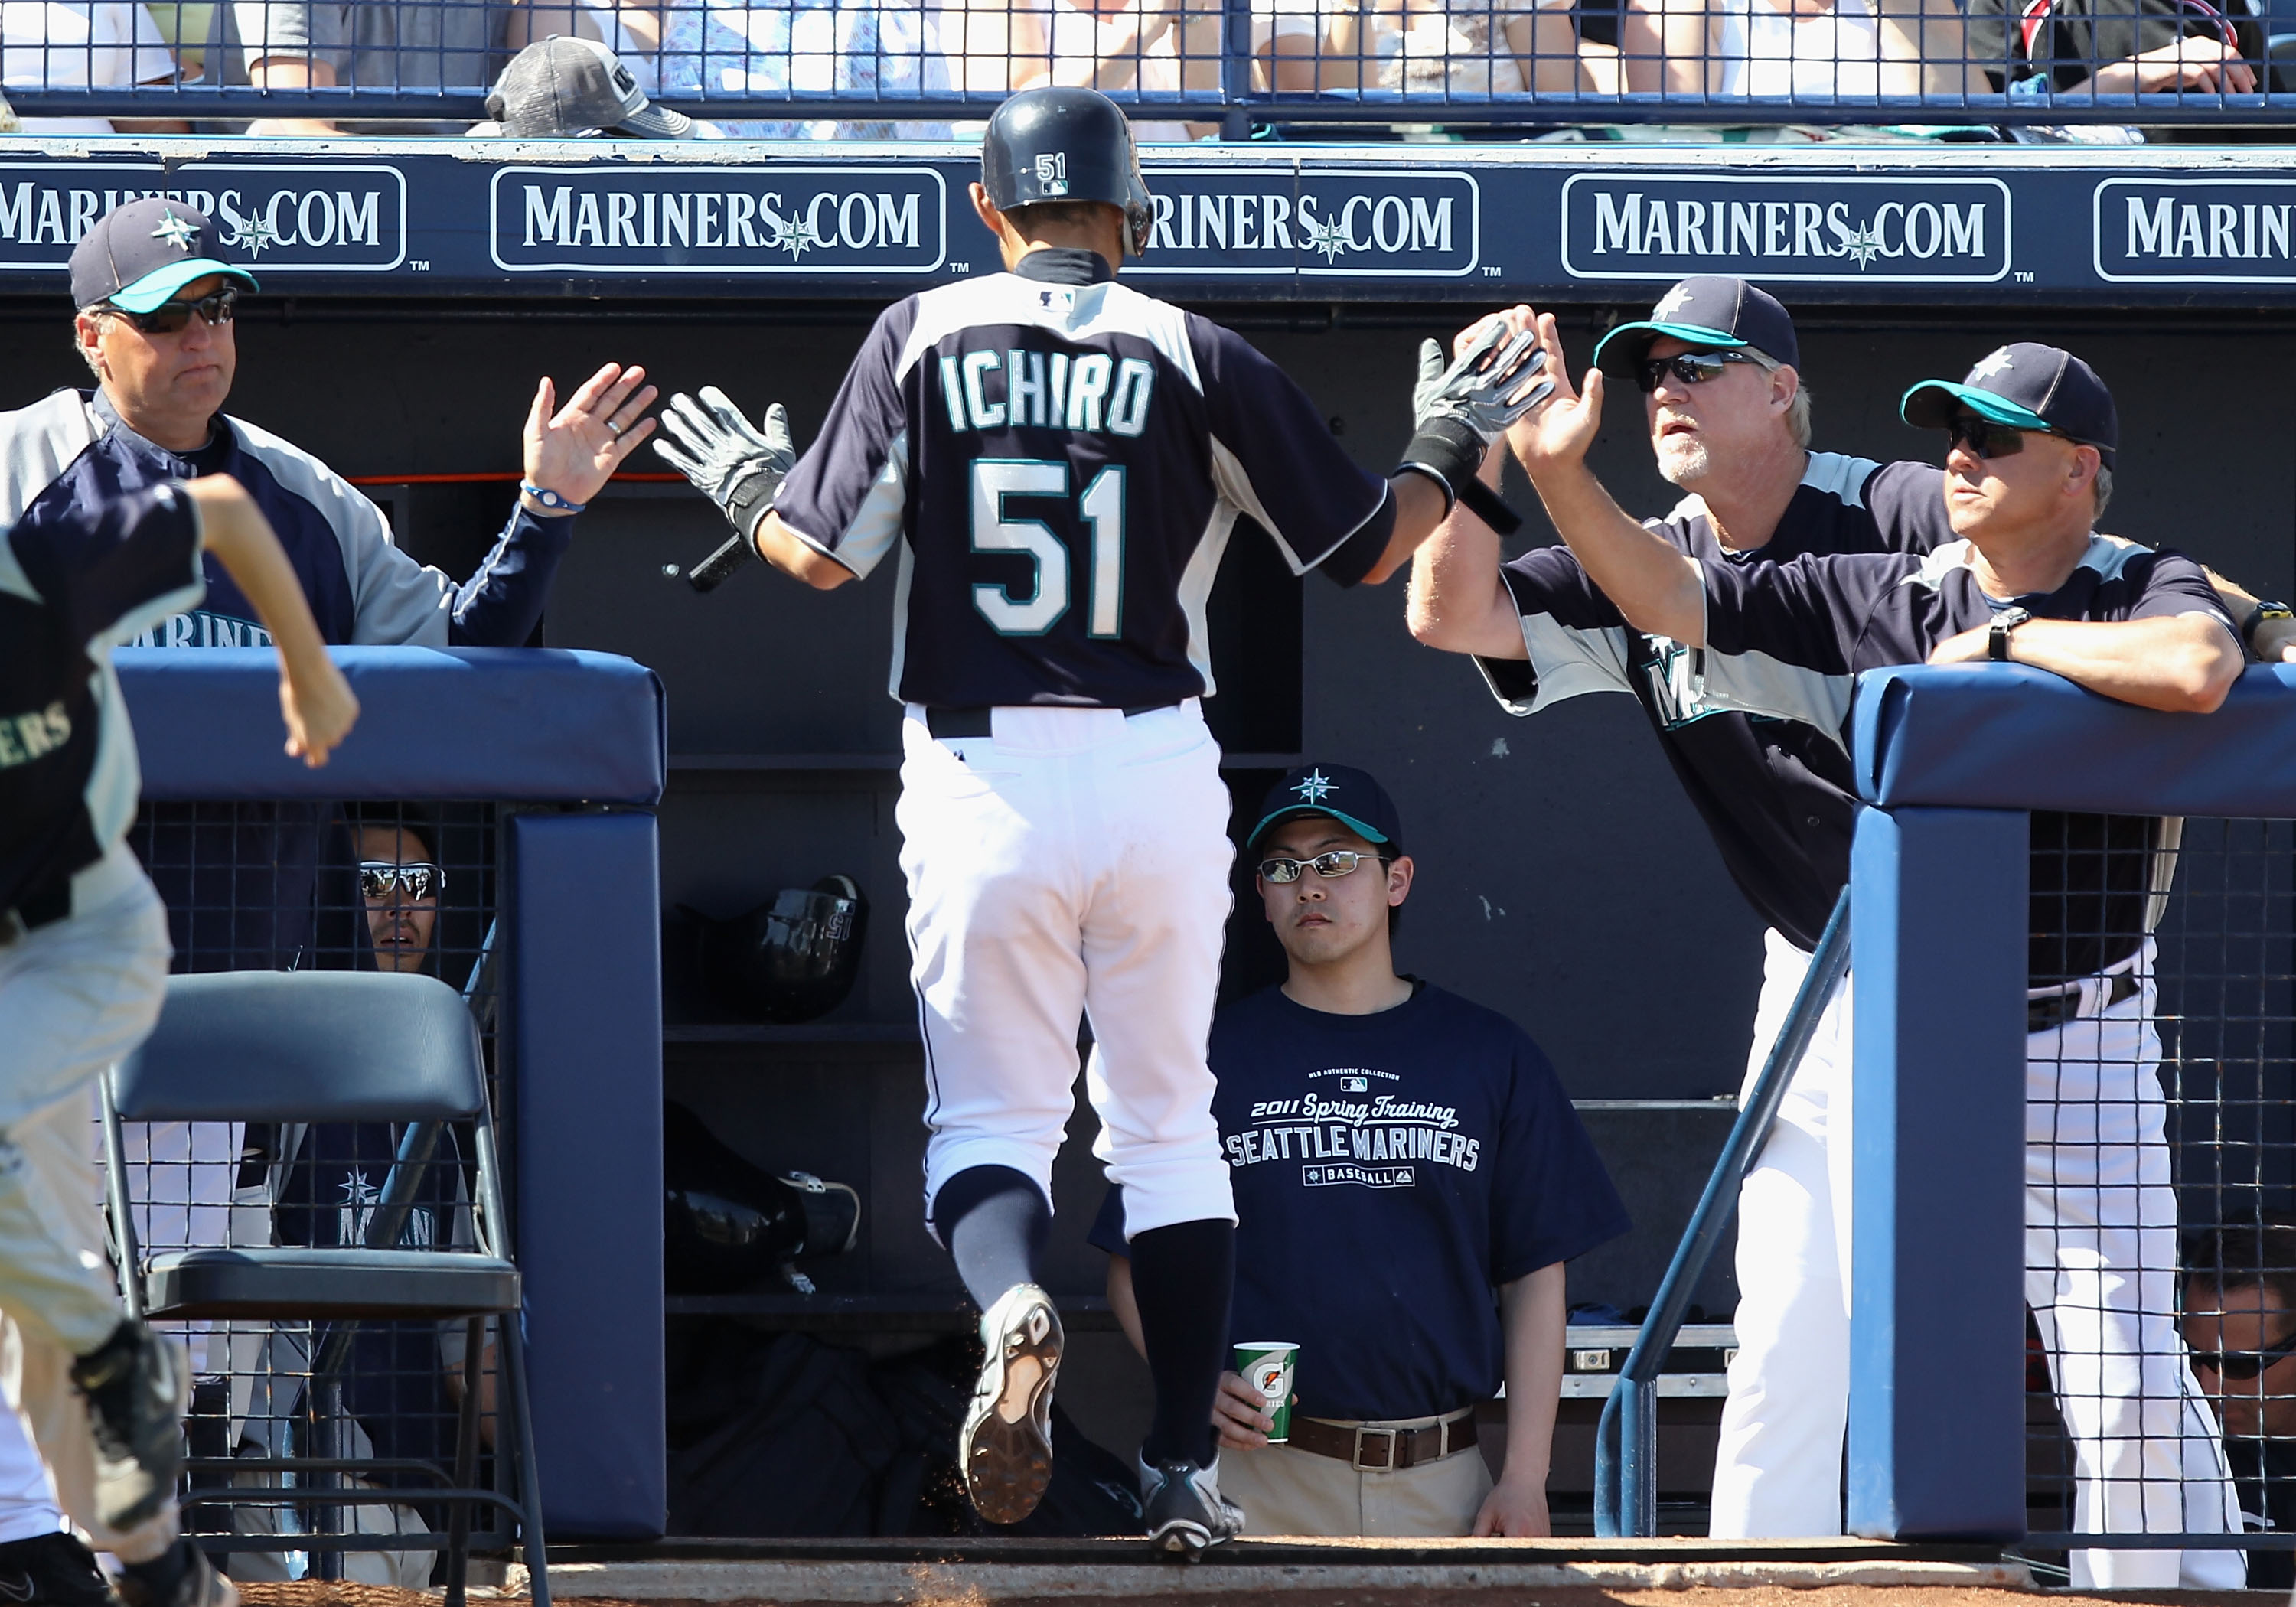 PEORIA, AZ - MARCH 12:  Ichiro Suzuki #51 of the Seattle Mariners high fives teammates after scoring a run against the Oakland Athletics during the second inning of the spring training game at Peoria Stadium on March 12, 2011 in Peoria, Arizona.  (Photo b